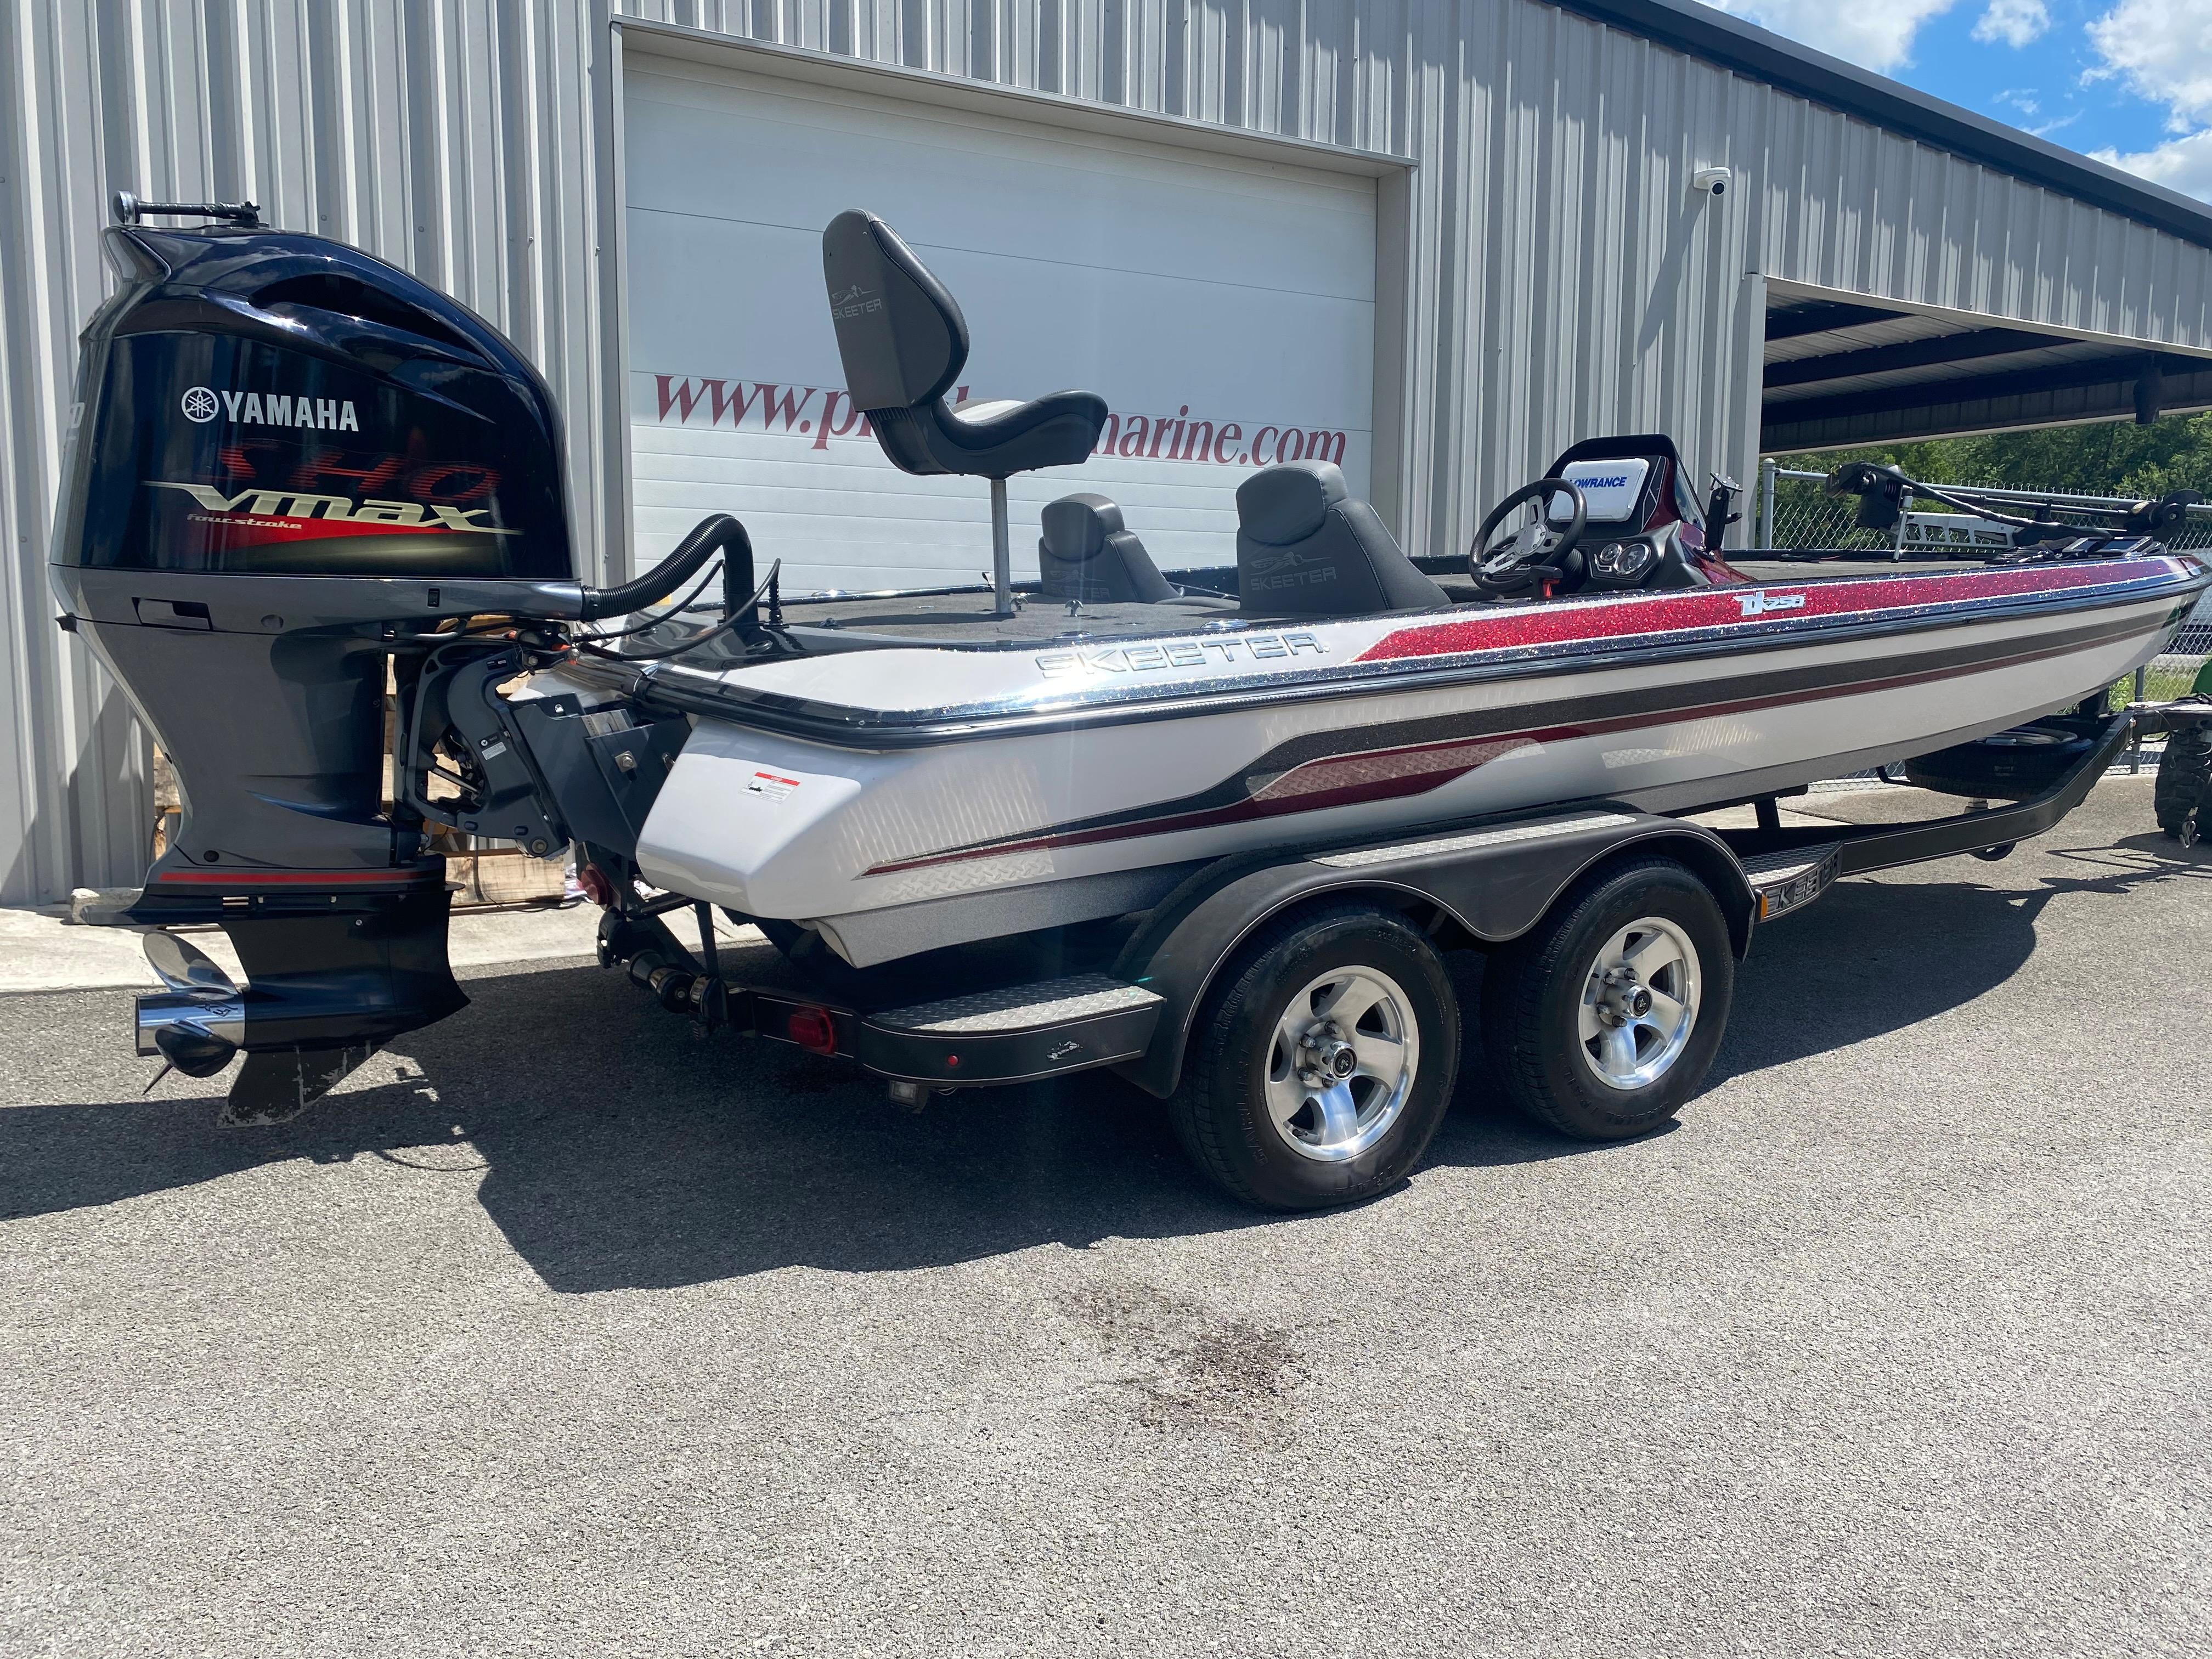 2015 Skeeter 250 Zx, London United States - boats.com